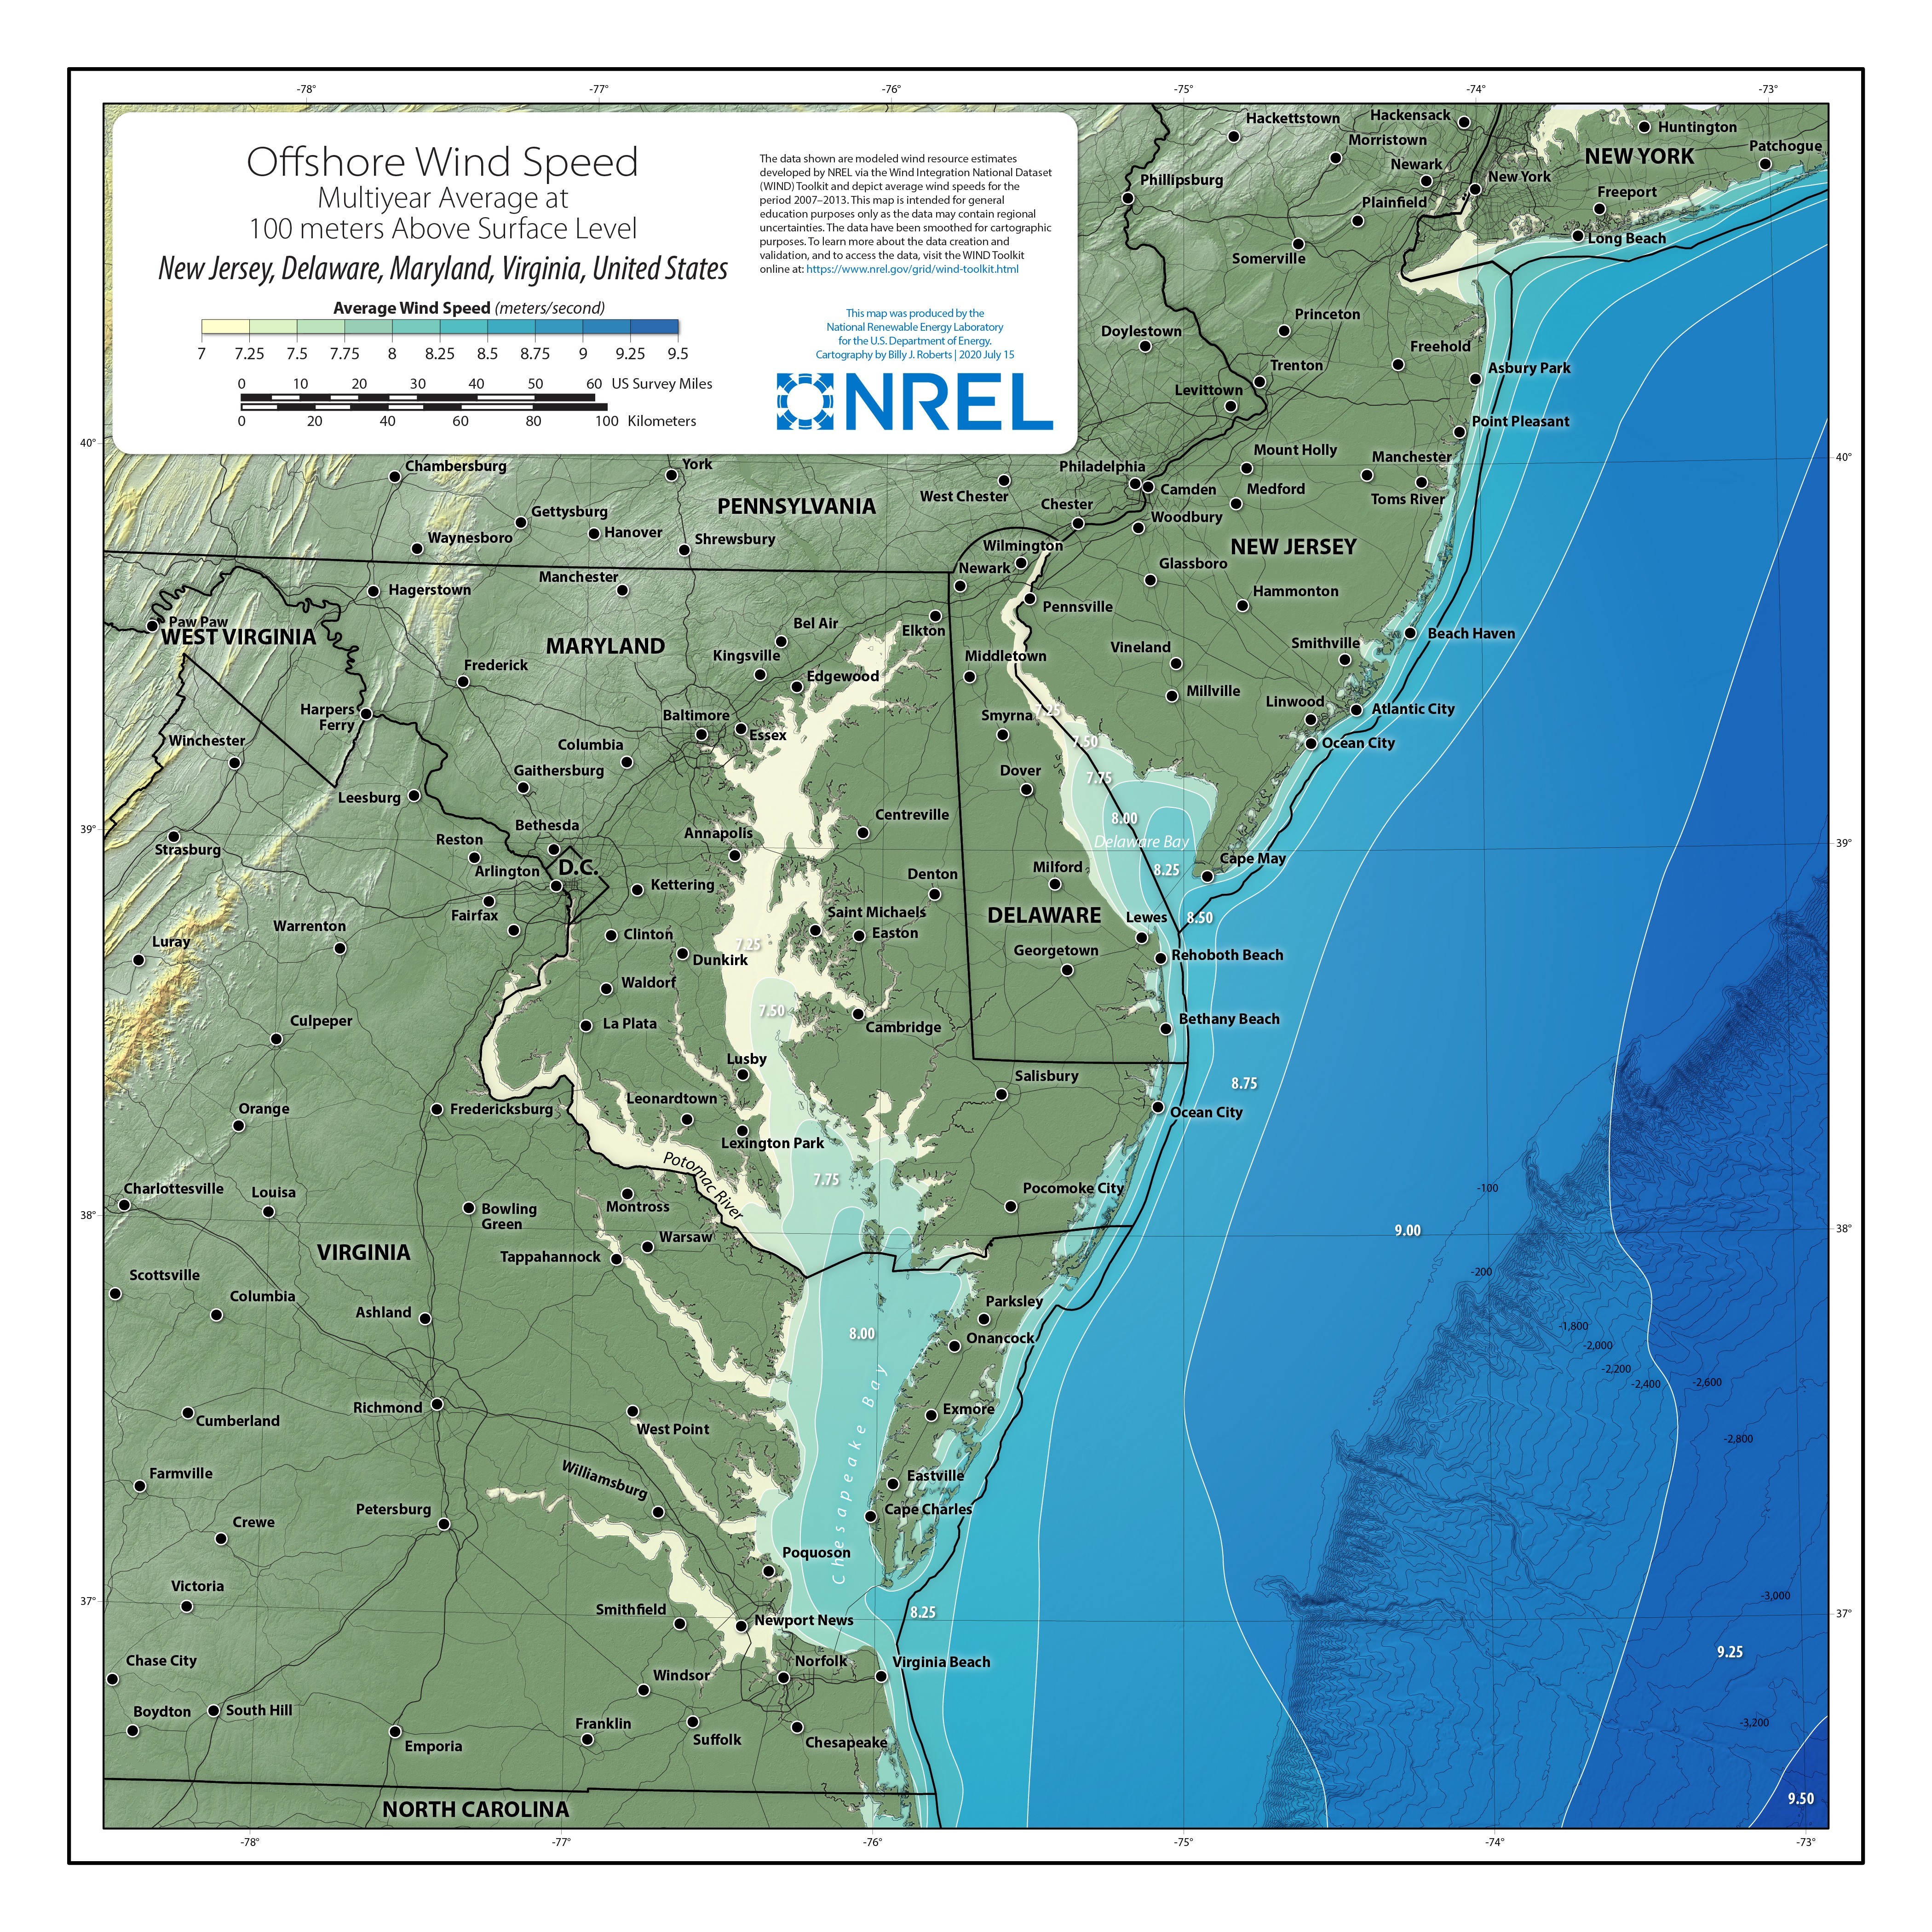 Virginia-Maryland-New Jersey-Delaware Offshore Wind Speed at 100 Meters